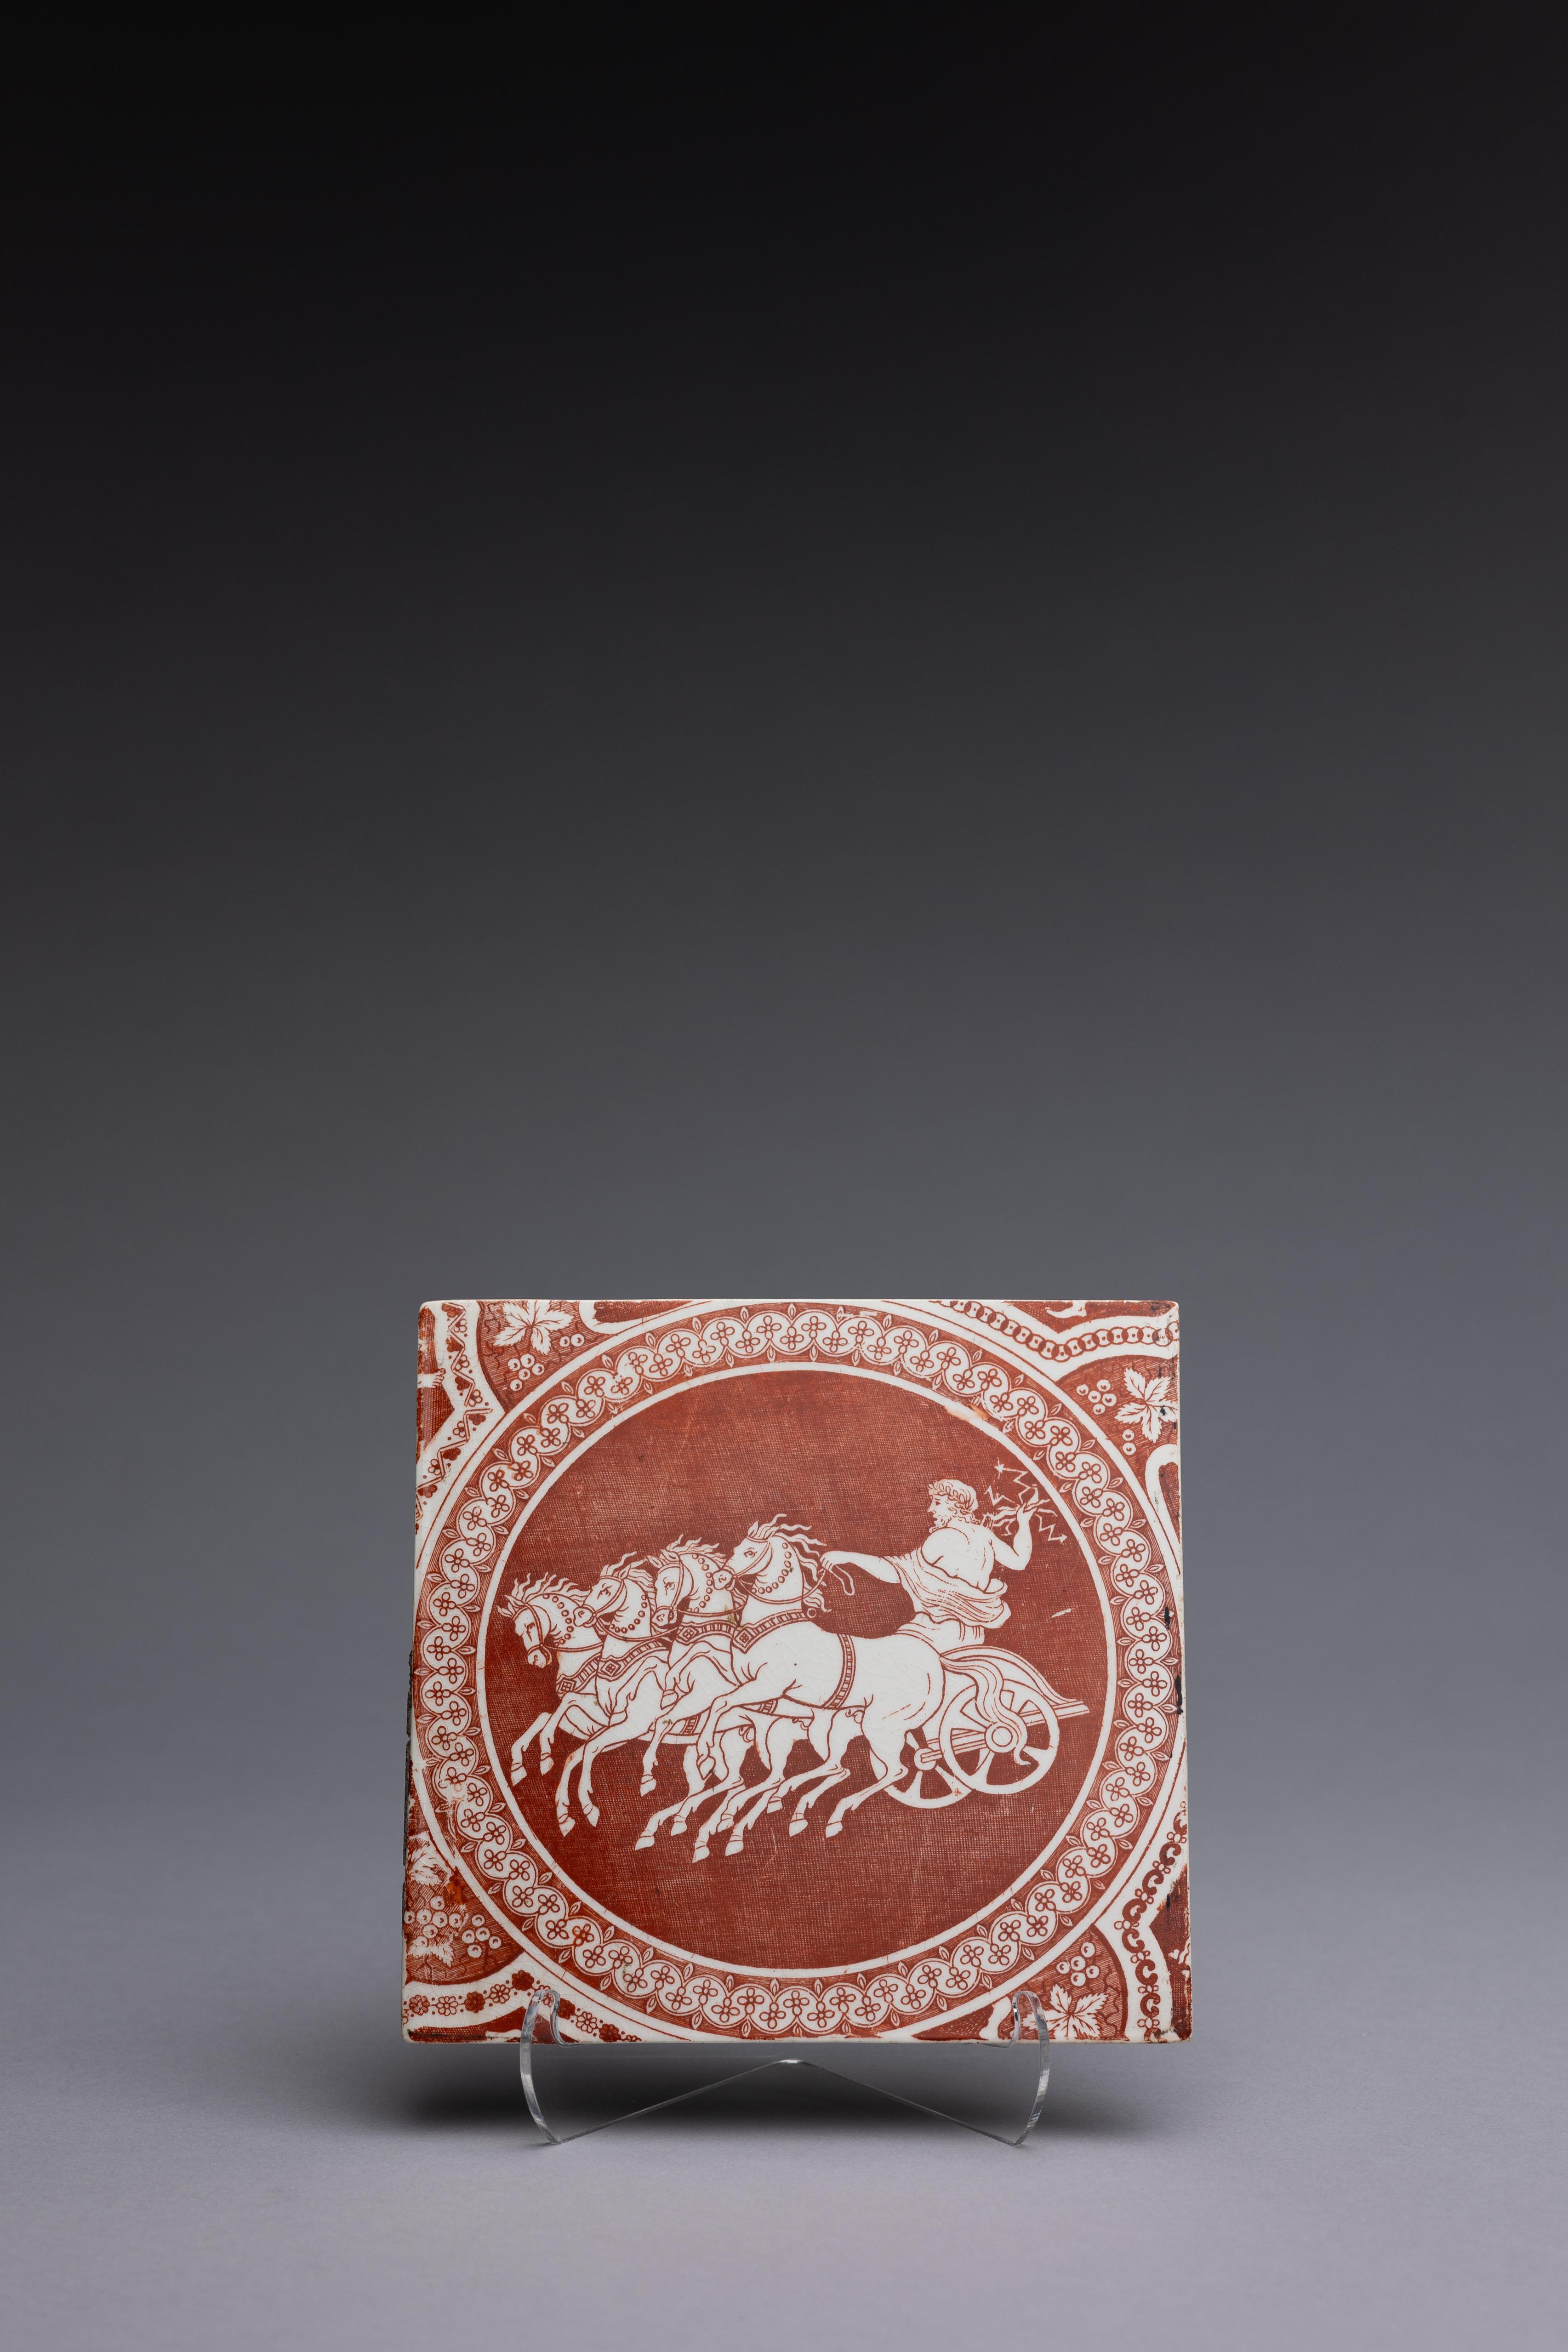 A Neoclassical red transferware tile made by Spode 1806-1810, with the ‘Zeus in His Chariot’ pattern.

Sir William Hamilton’s Collection of Etruscan, Greek and Roman antiquities, first published in 1766 by Pierre d’Hancarville, was a landmark